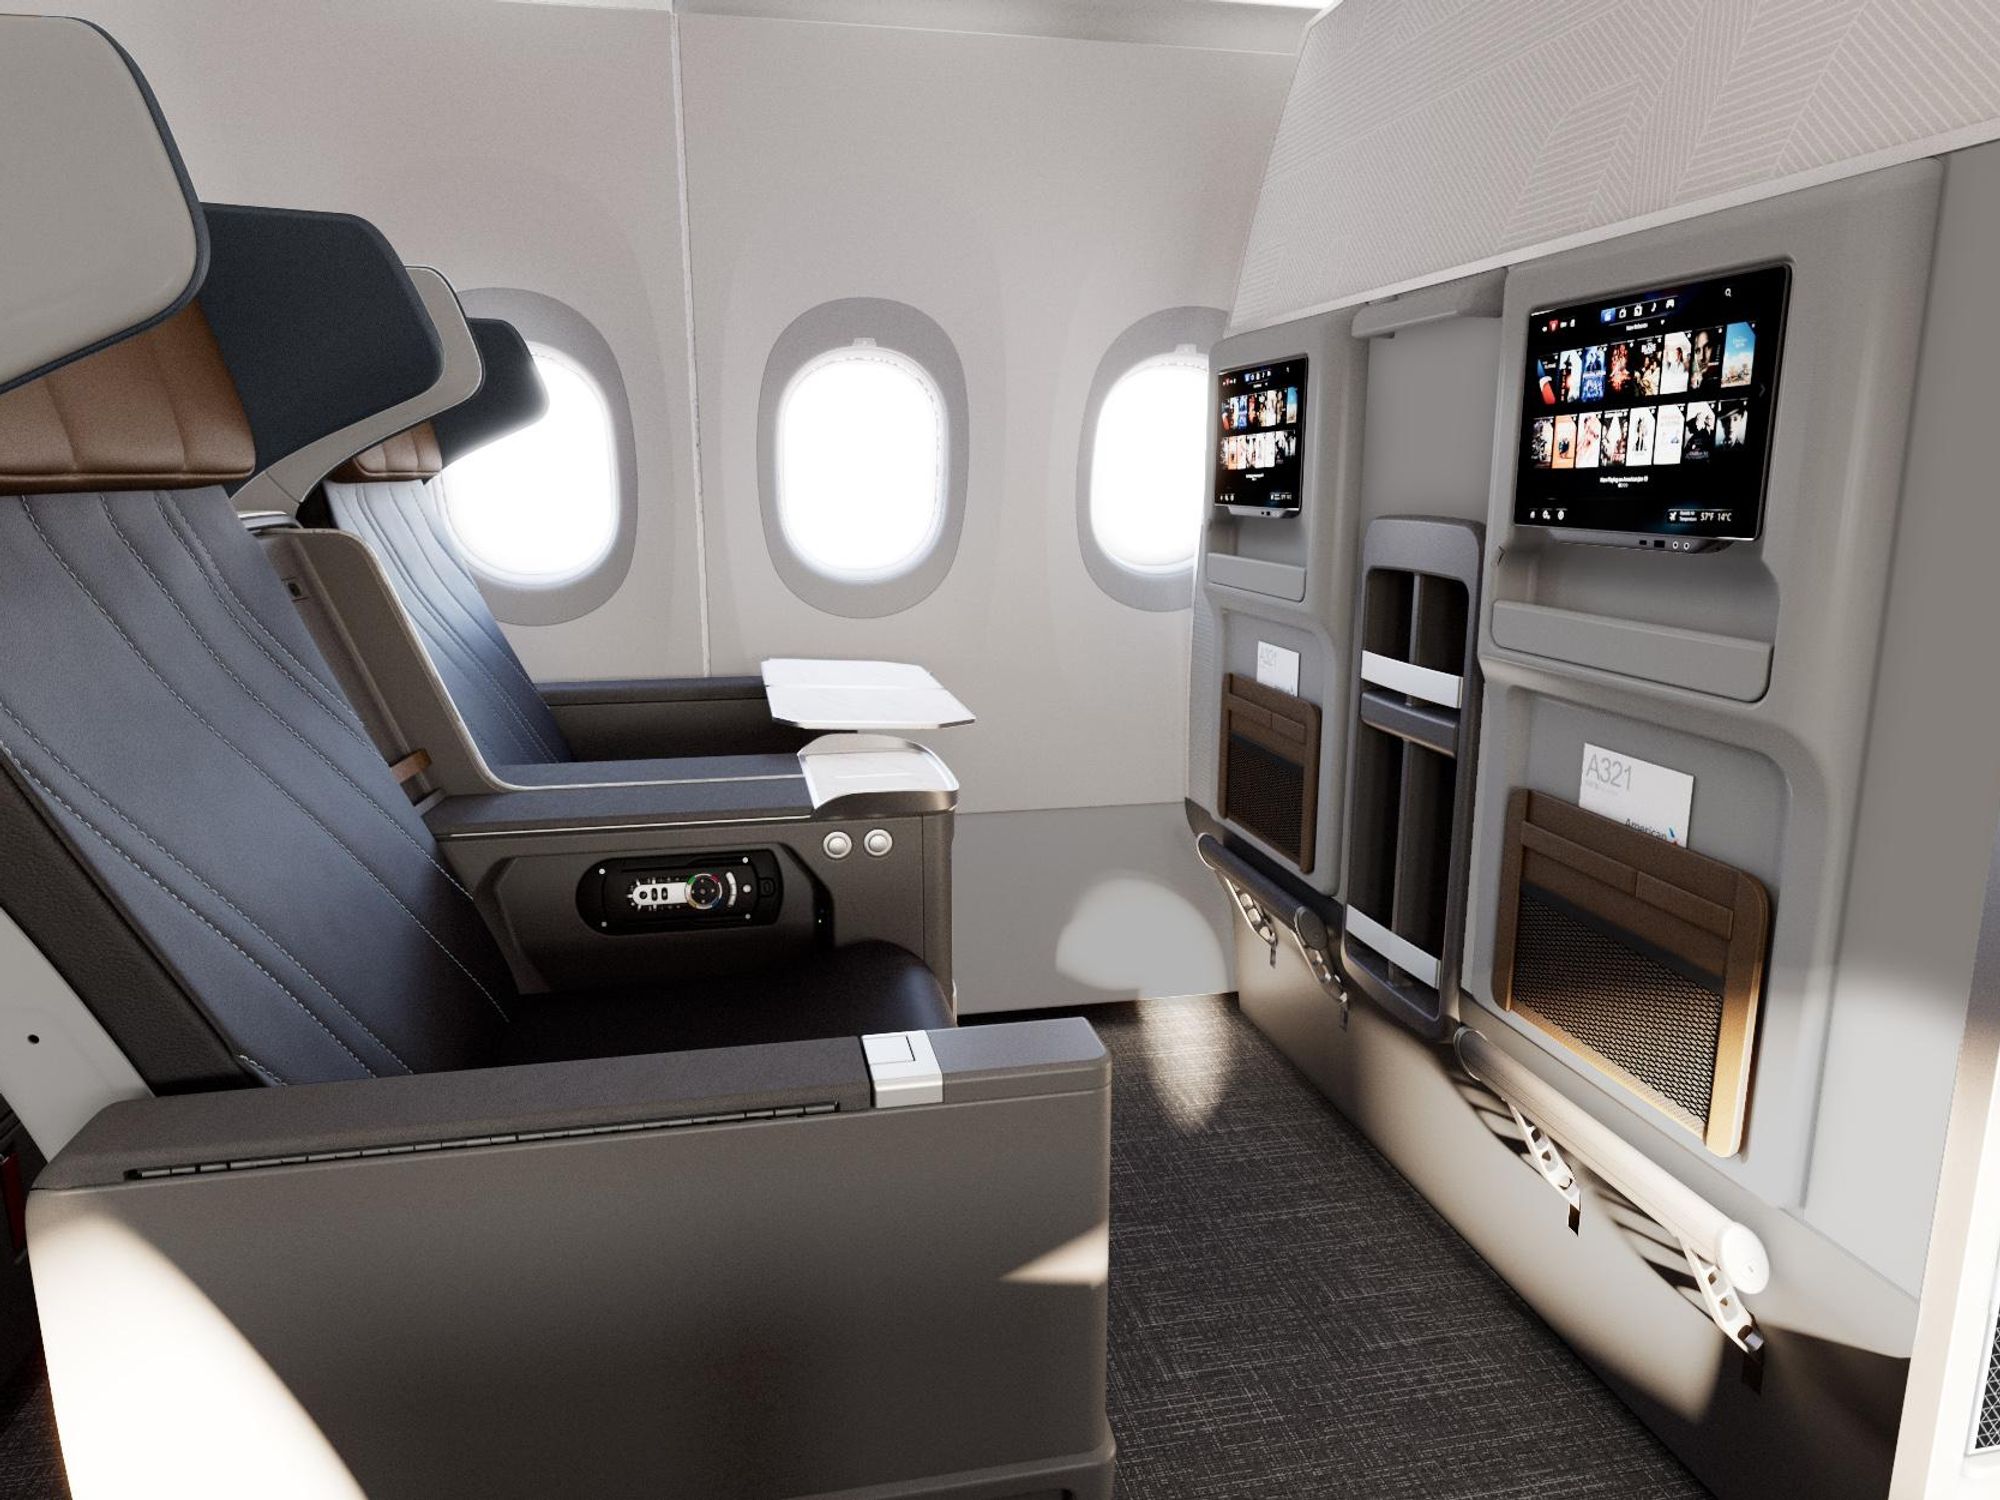 Company says newly designed double-decker seats will be better for airline  passengers. See why